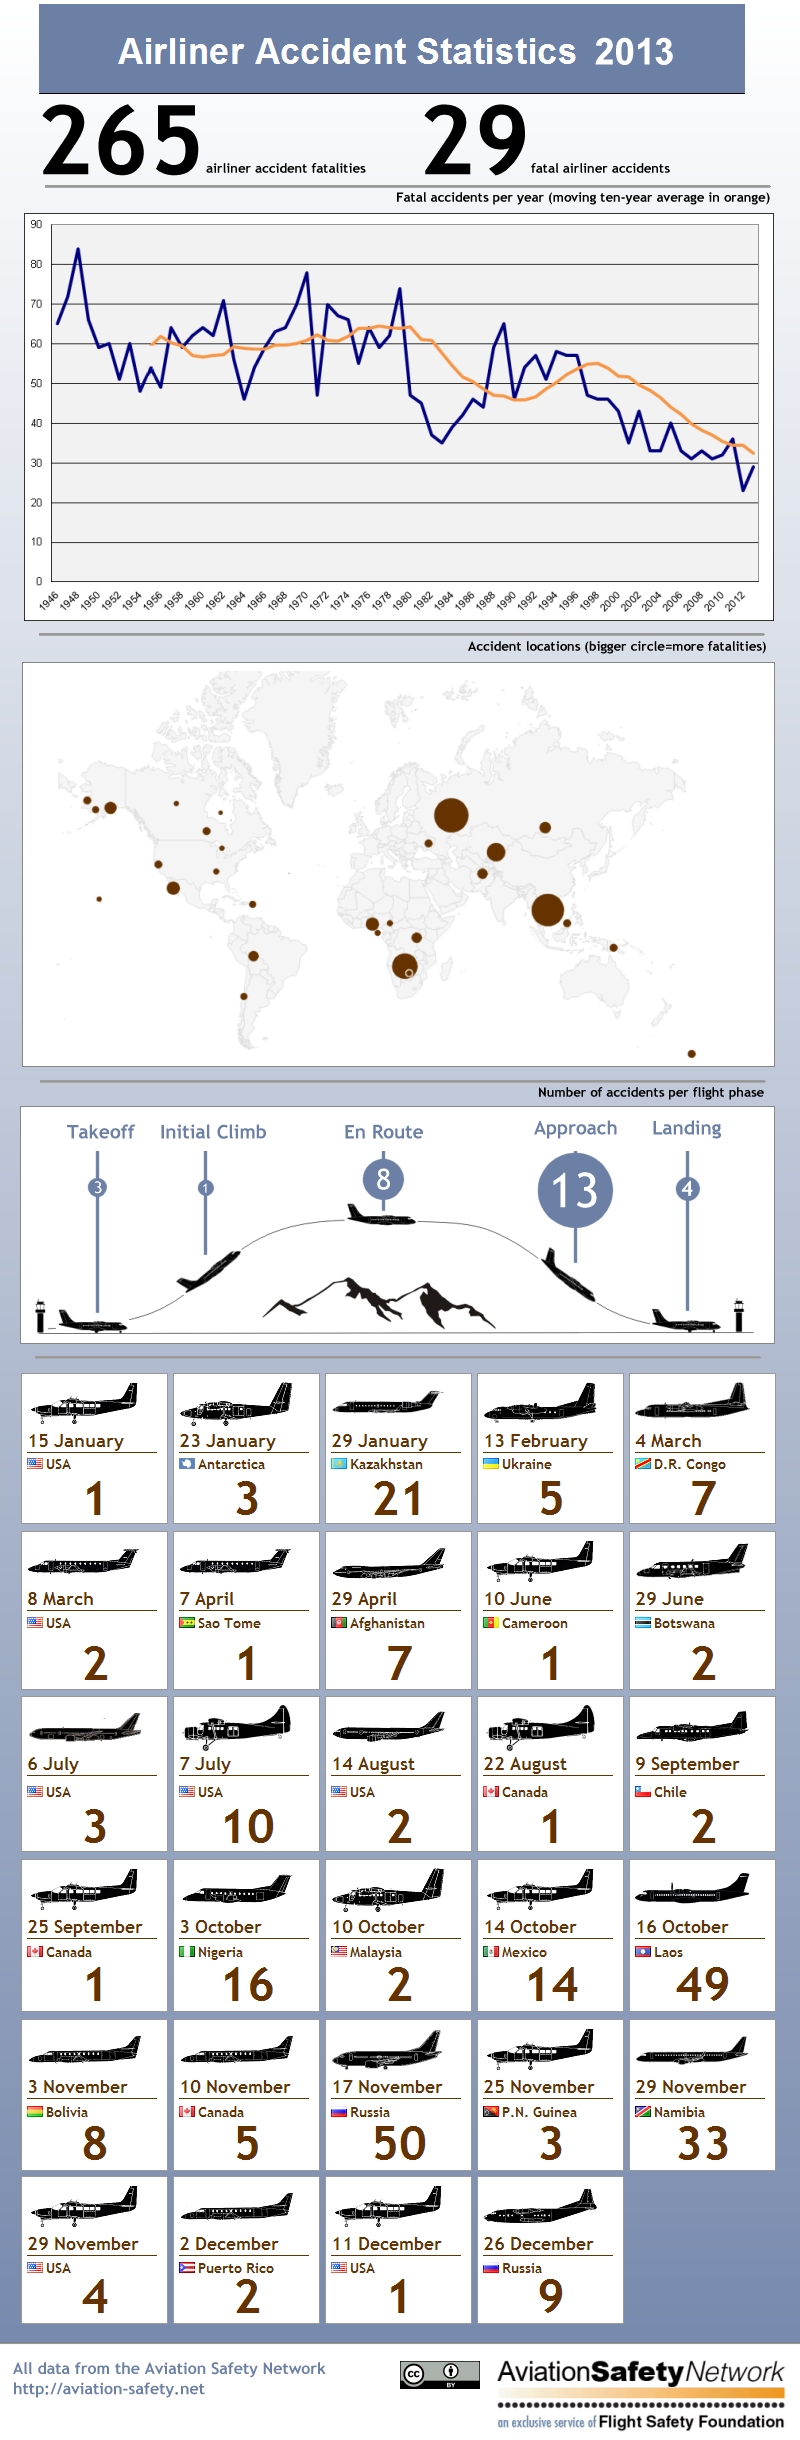 Aviation Safety Network: airliner accident fatalities 2013